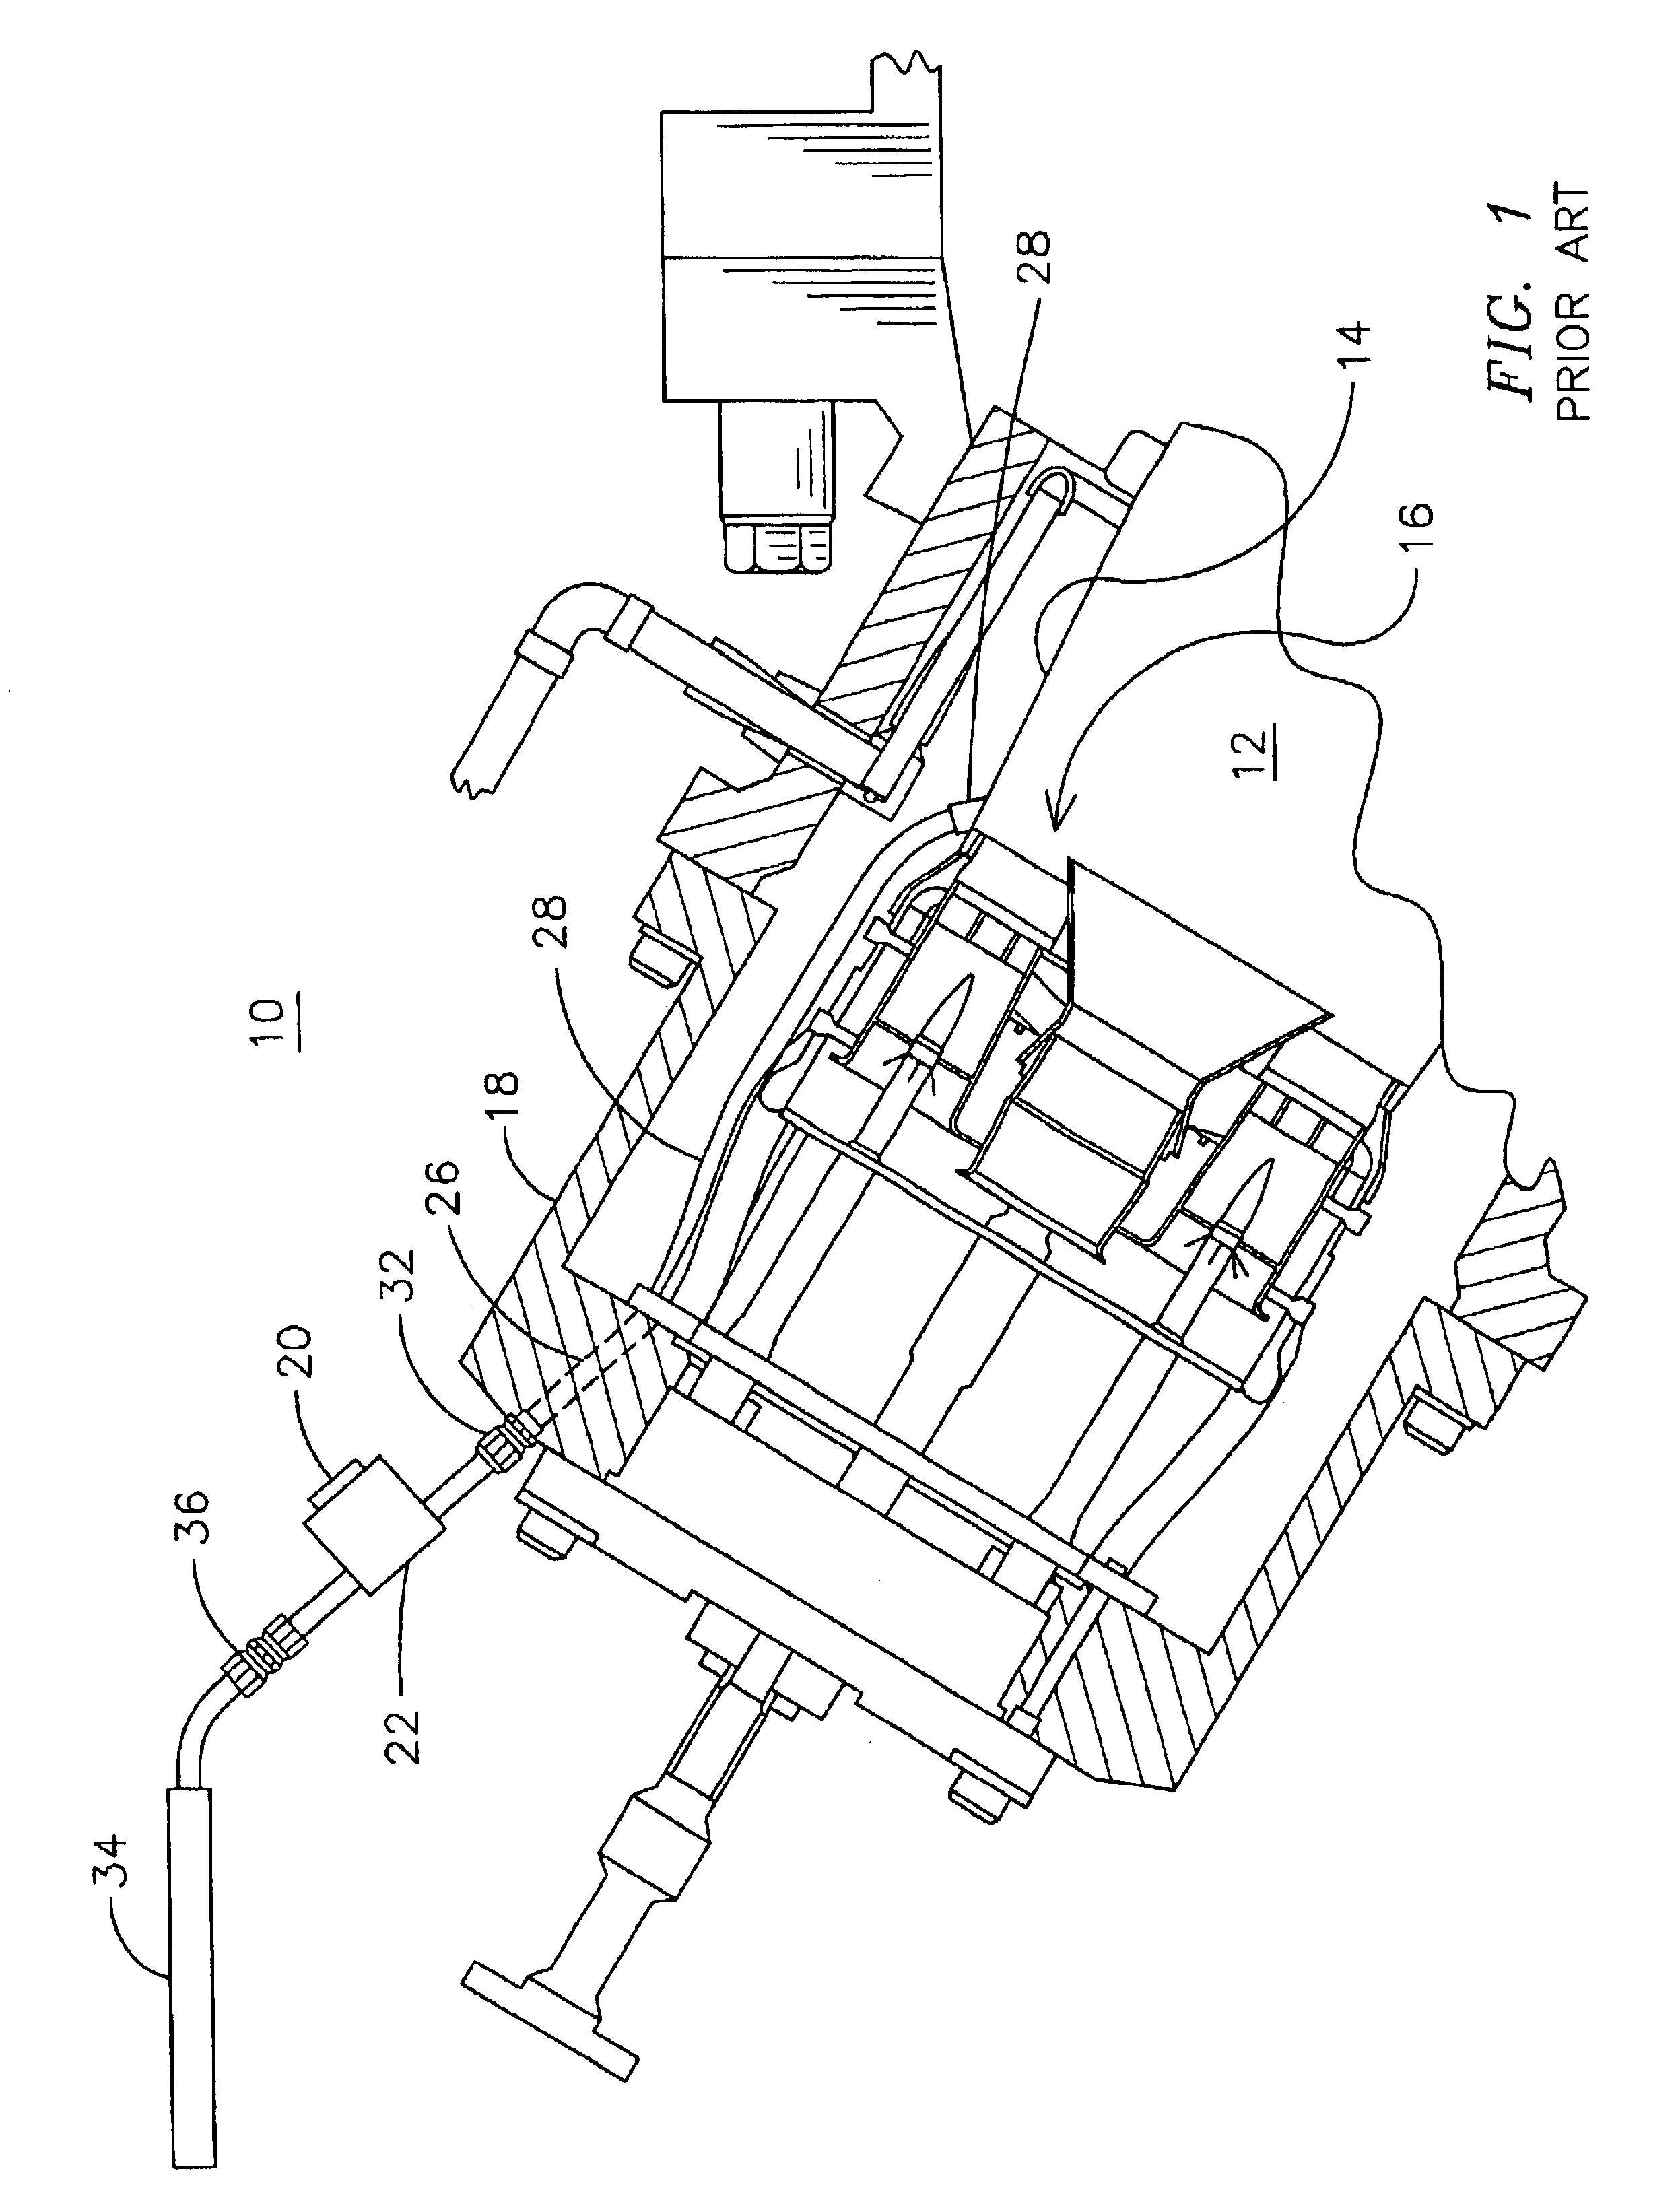 Gas turbine with flexible combustion sensor connection